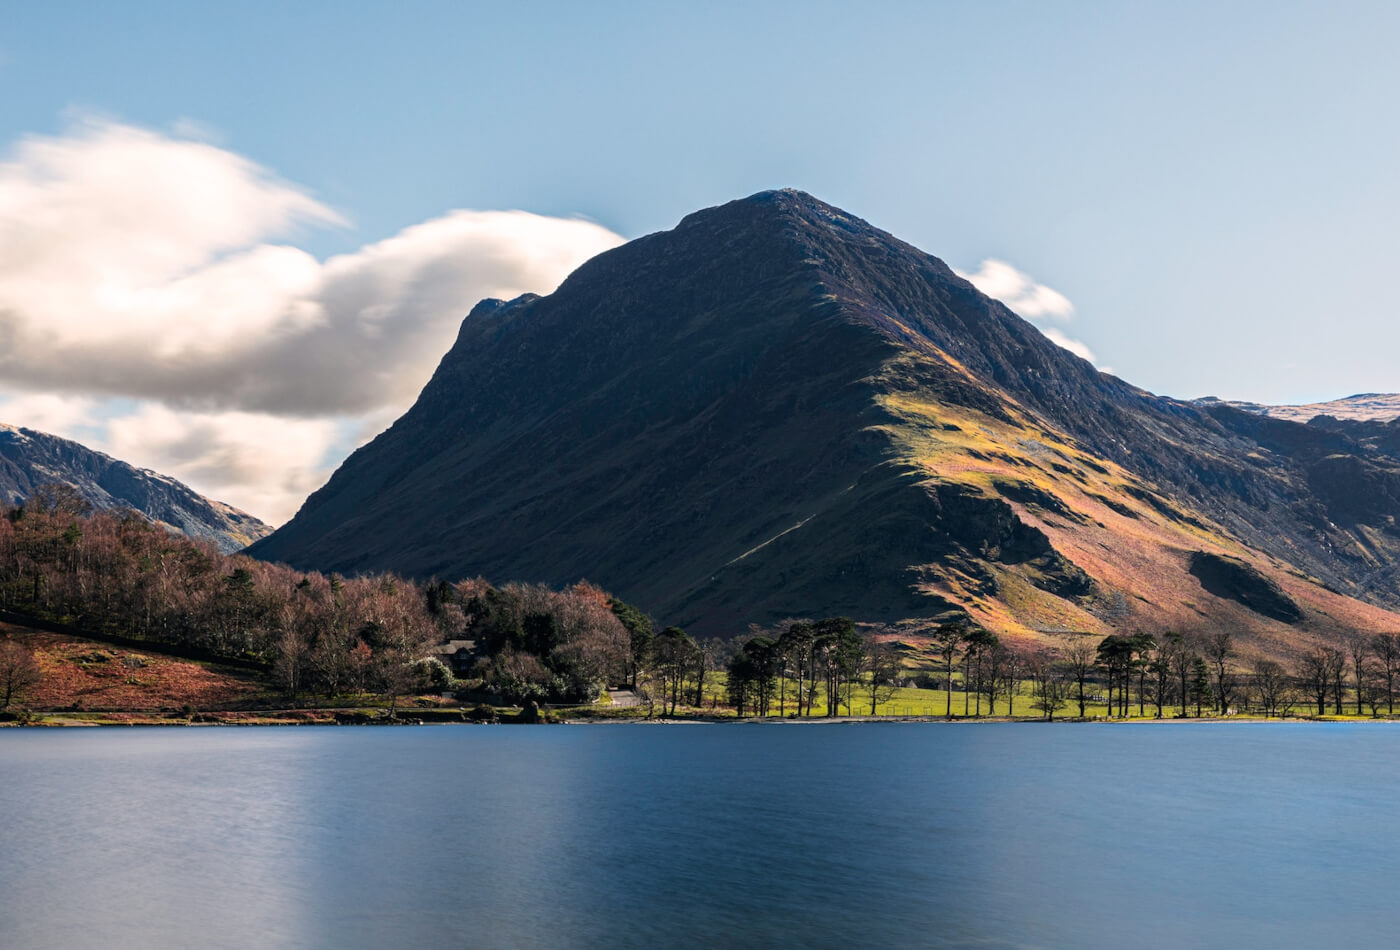 A view across Buttermere to the mountains in the distance